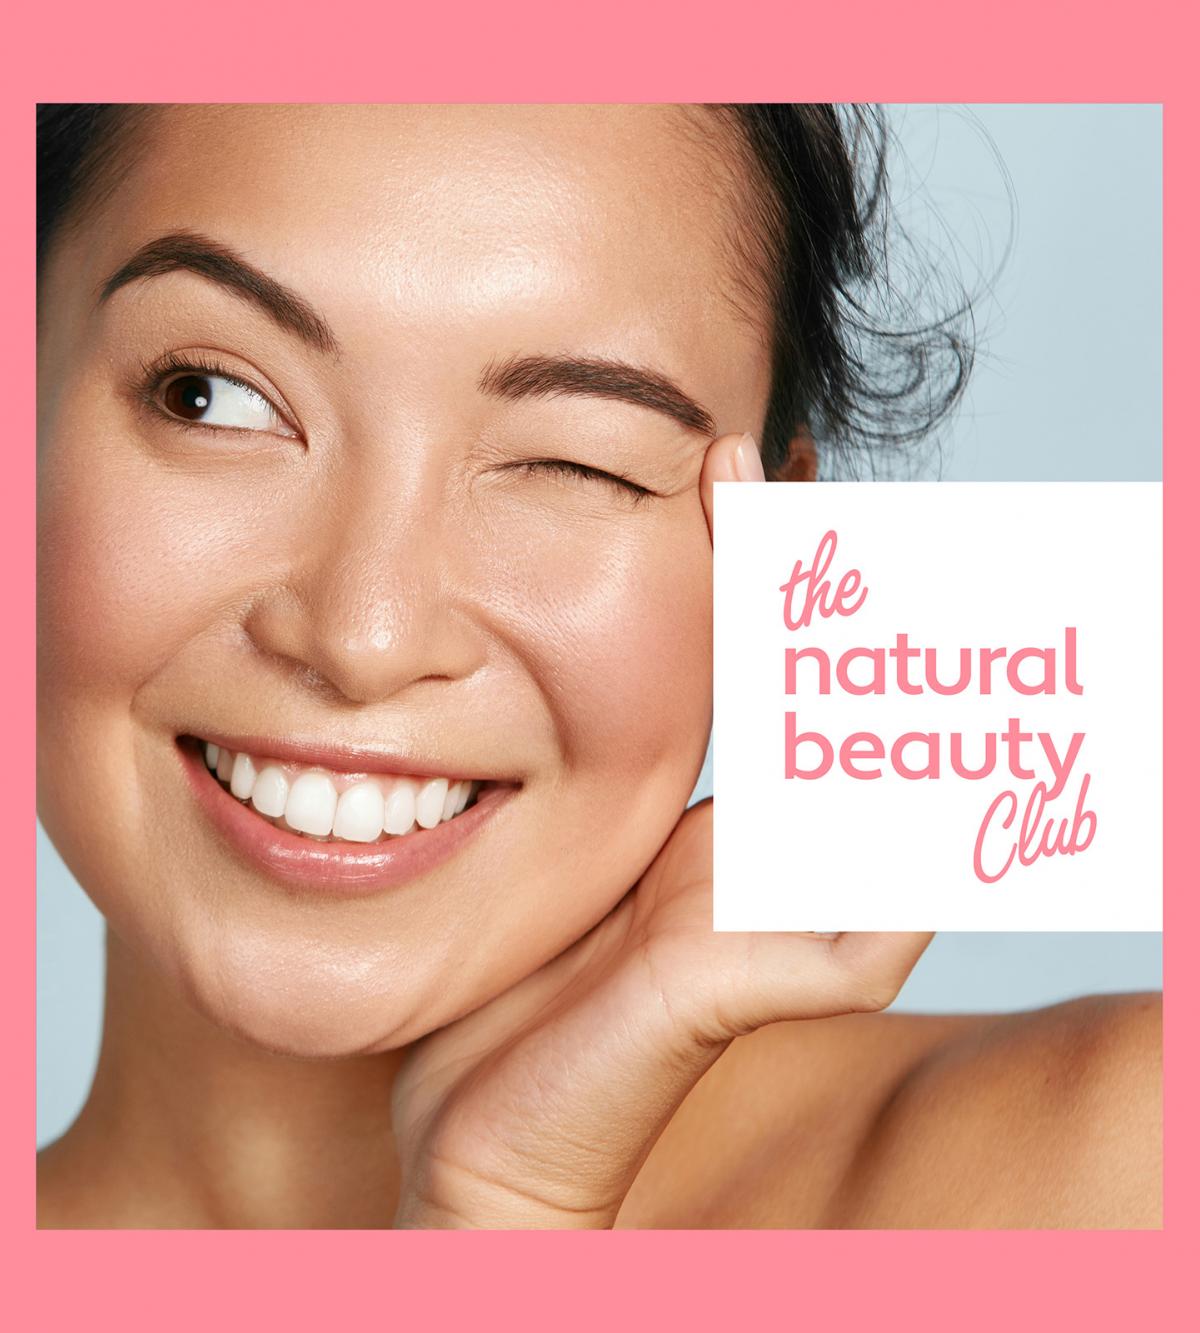 The Natural Beauty Club  comma, brand strategists